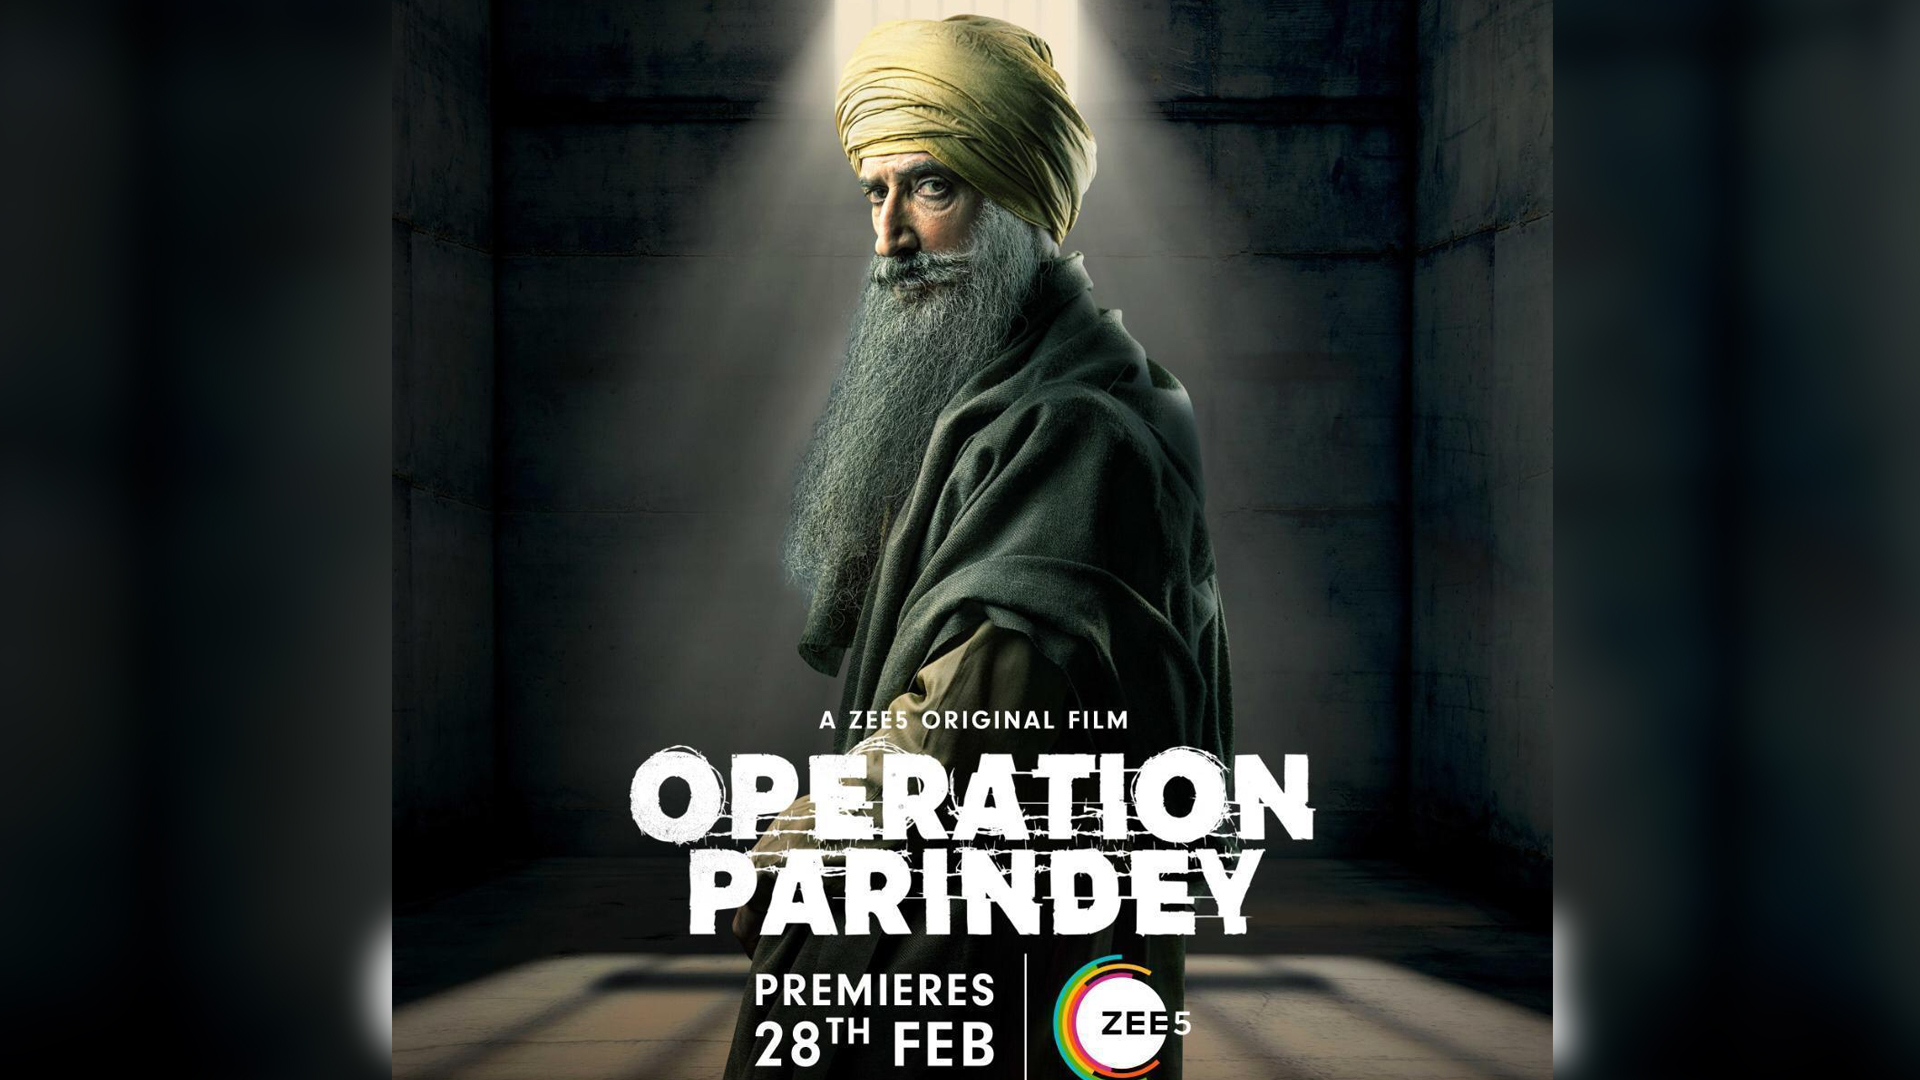 Rahul Dev will be seen in a never seen before avatar in ZEE5’s Operation Parindey